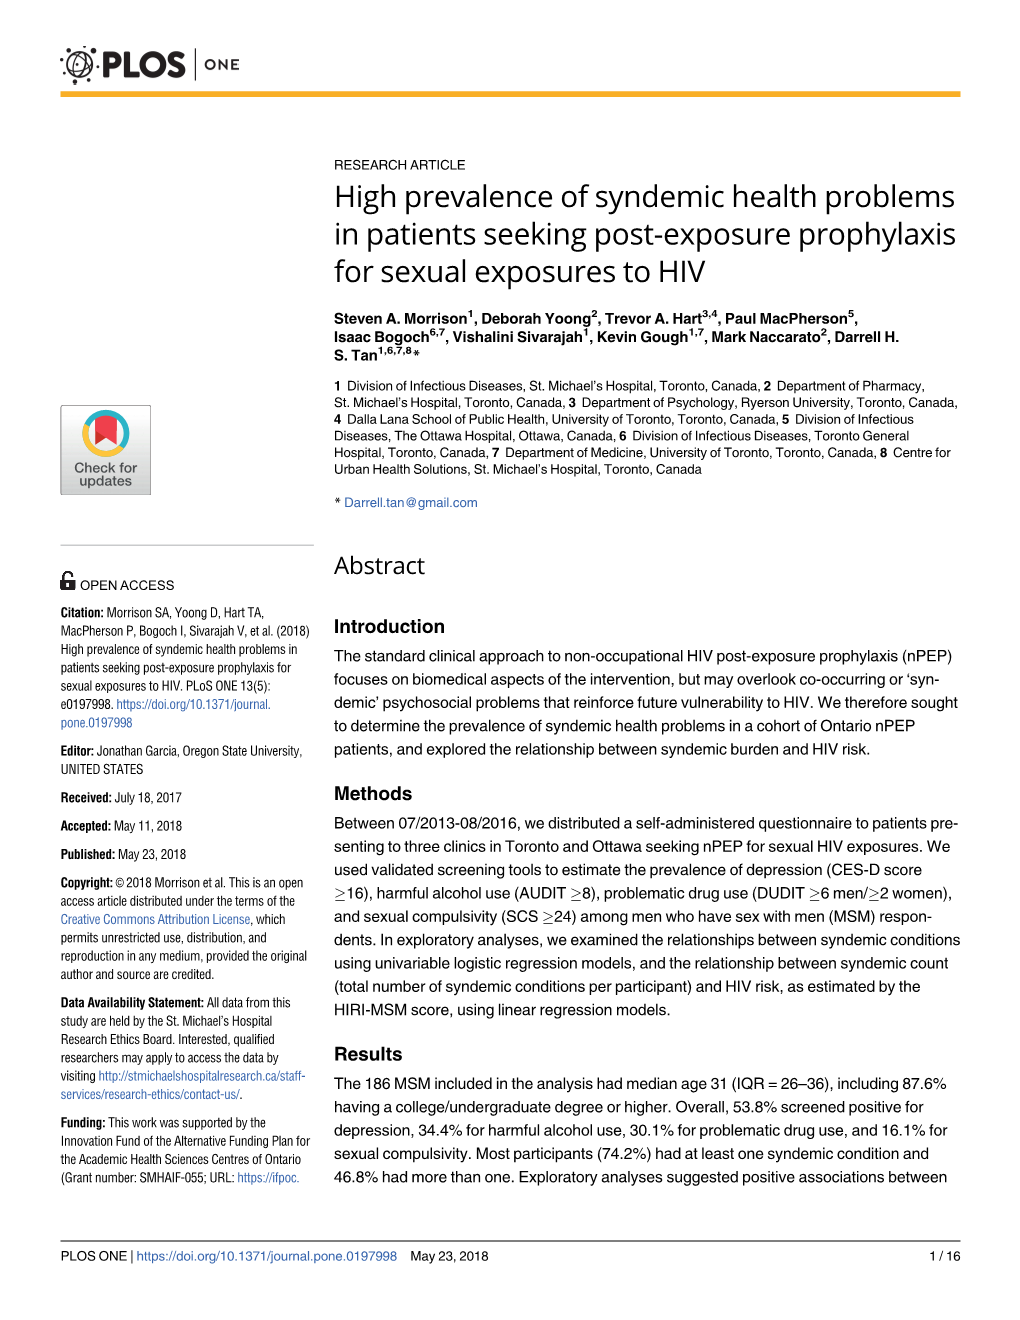 High Prevalence of Syndemic Health Problems in Patients Seeking Post-Exposure Prophylaxis for Sexual Exposures to HIV